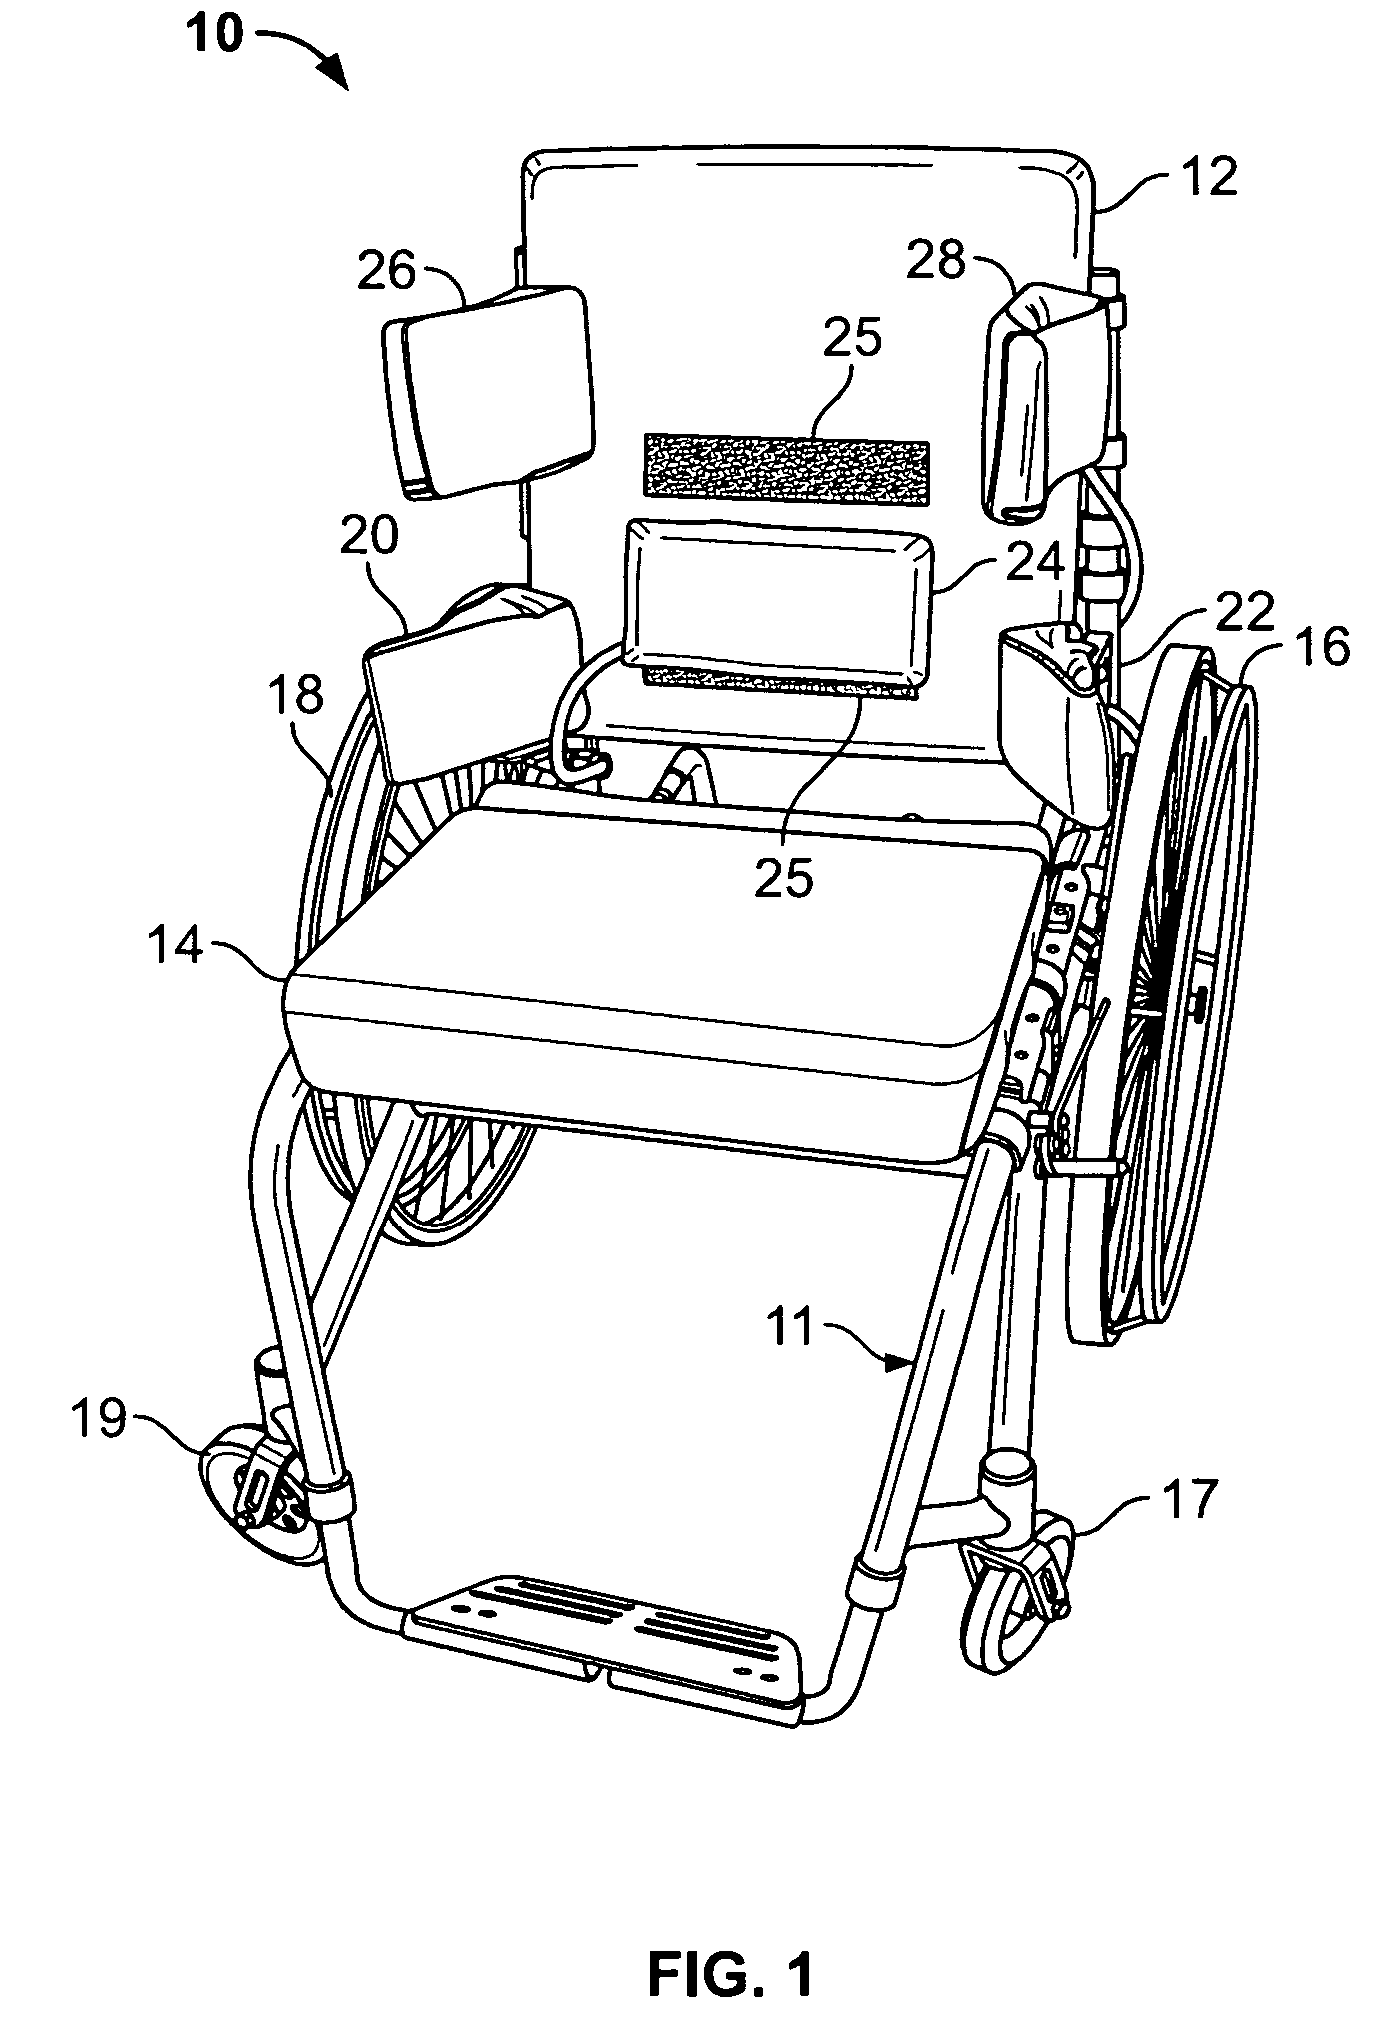 Pneumatic support system for a wheelchair